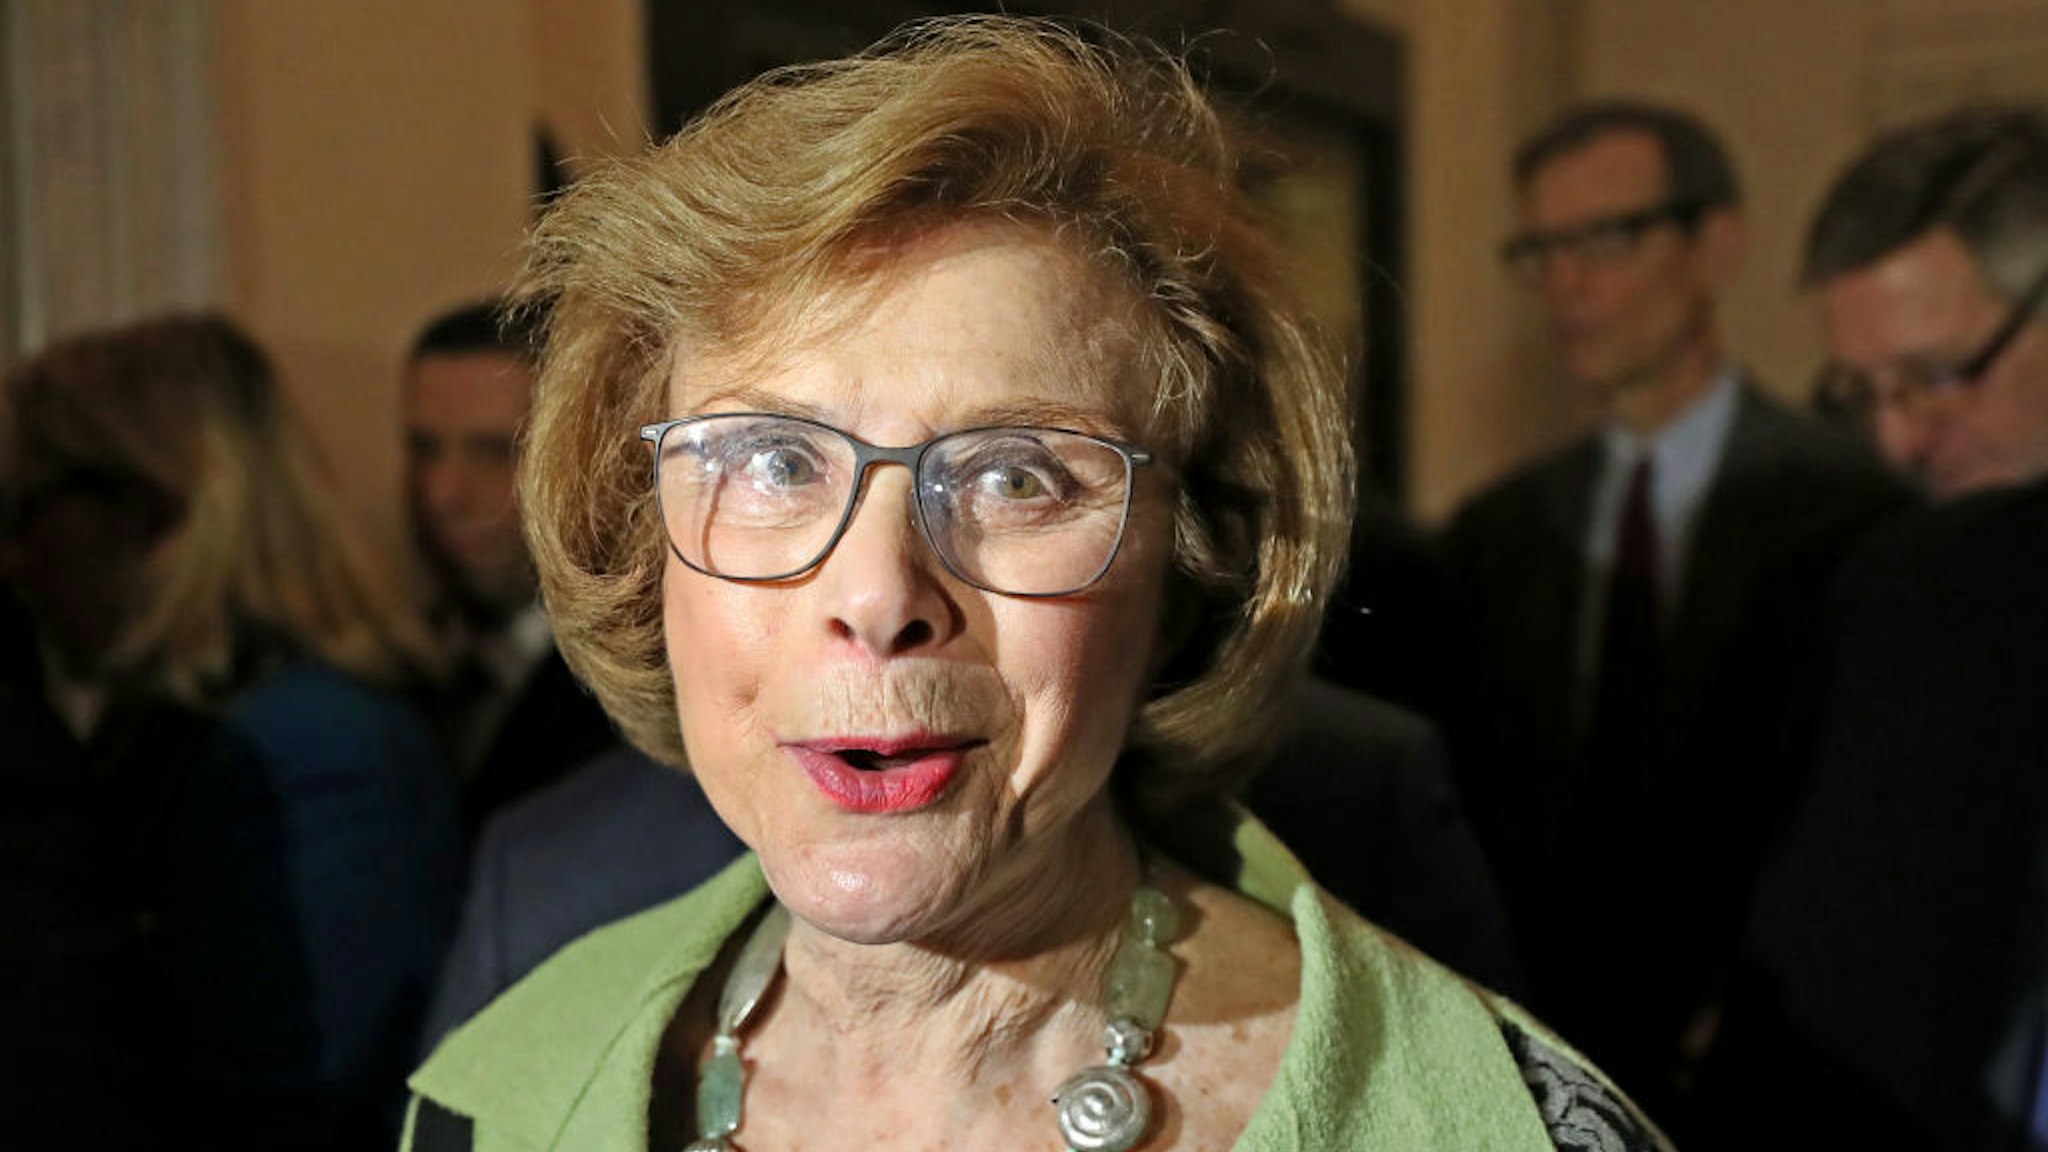 BOSTON - FEBRUARY 7: Acting Massachusetts Senate president Harriette Chandler after she read a statement to the media after a private caucus at the Massachusetts State House in Boston on Feb. 7, 2018. A vote formalized the decision by Senate Democrats to transition Chandler, an 80-year-old Democrat from Worcester, from acting to permanent president. Her ascent was triggered by sexual assault allegations leveled against former Senate President Stanley C. Rosenbergs husband, Bryon Hefner, in November, and Rosenbergs decision to step down during an internal ethics investigation. (Photo by David L. Ryan/The Boston Globe via Getty Images)